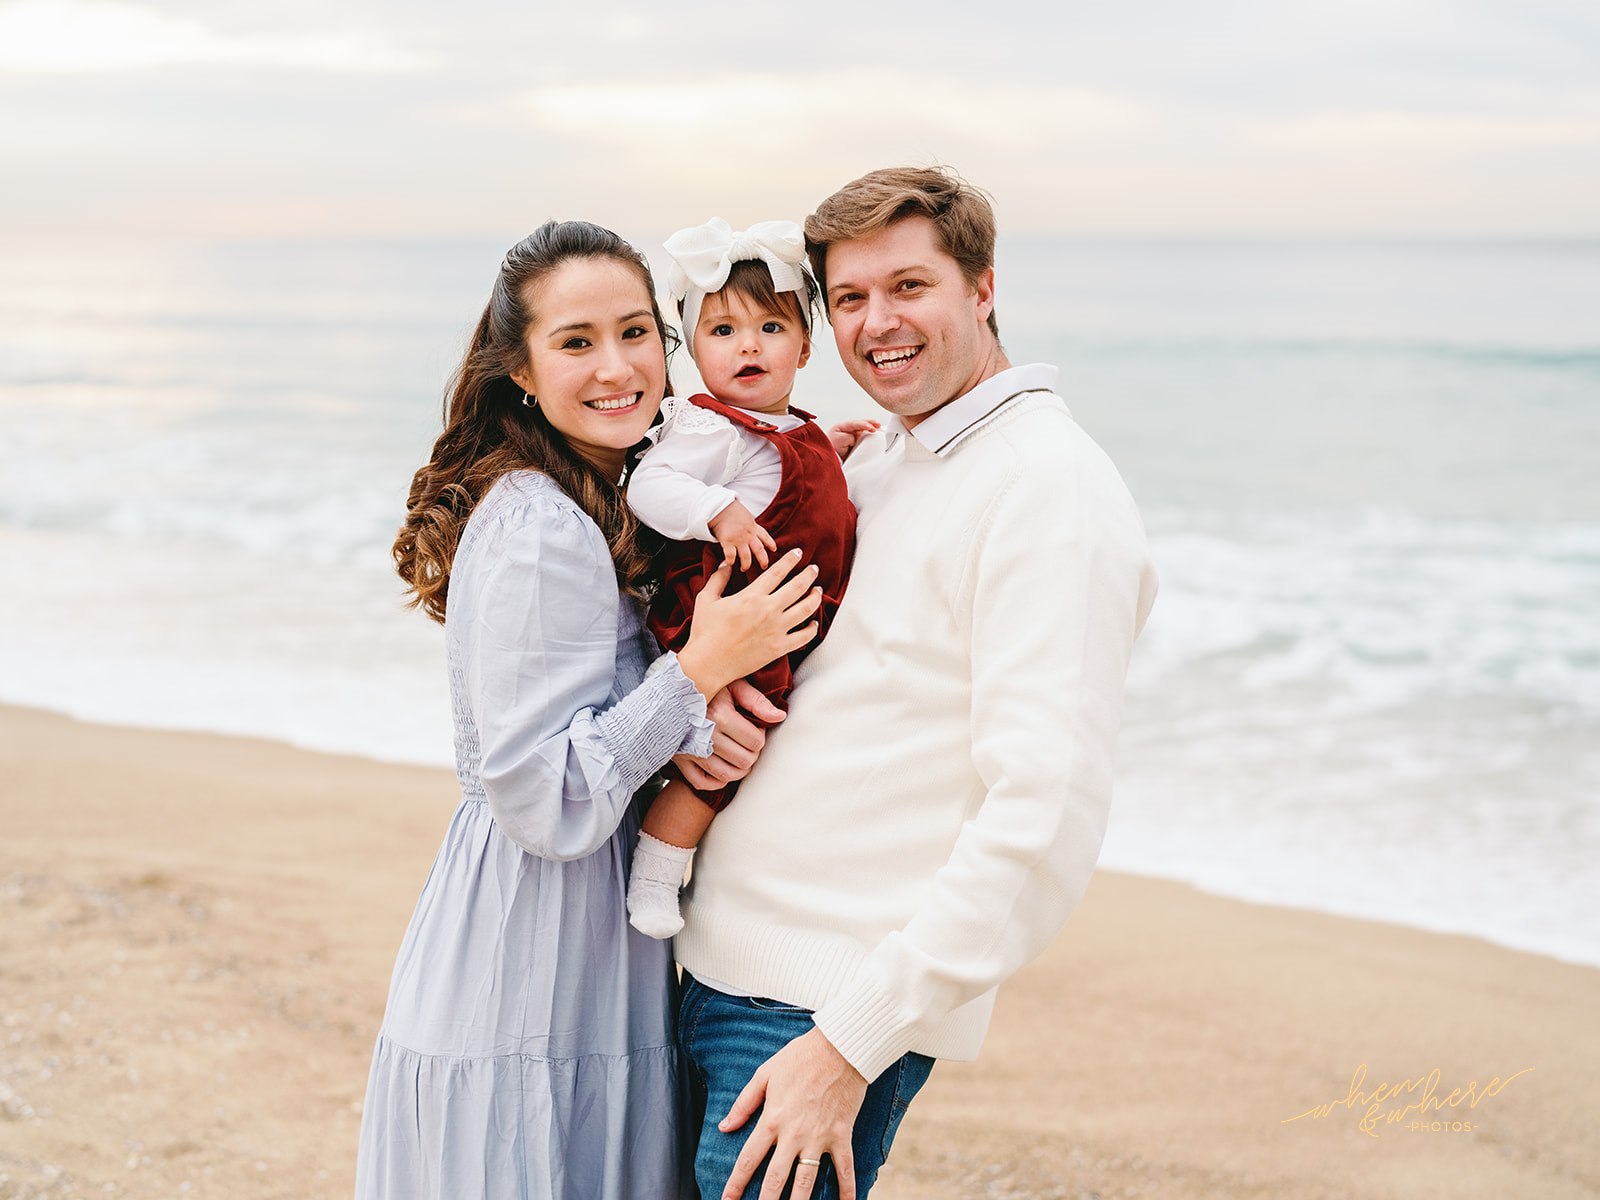 Family Portrait Session - Redondo Beach, California. Stacy reached out to me to document her family and her happy daughter. It's rare when you get a chance to work with such a happy baby. She had the biggest smile, even with dreary December clouds in Los Angeles.